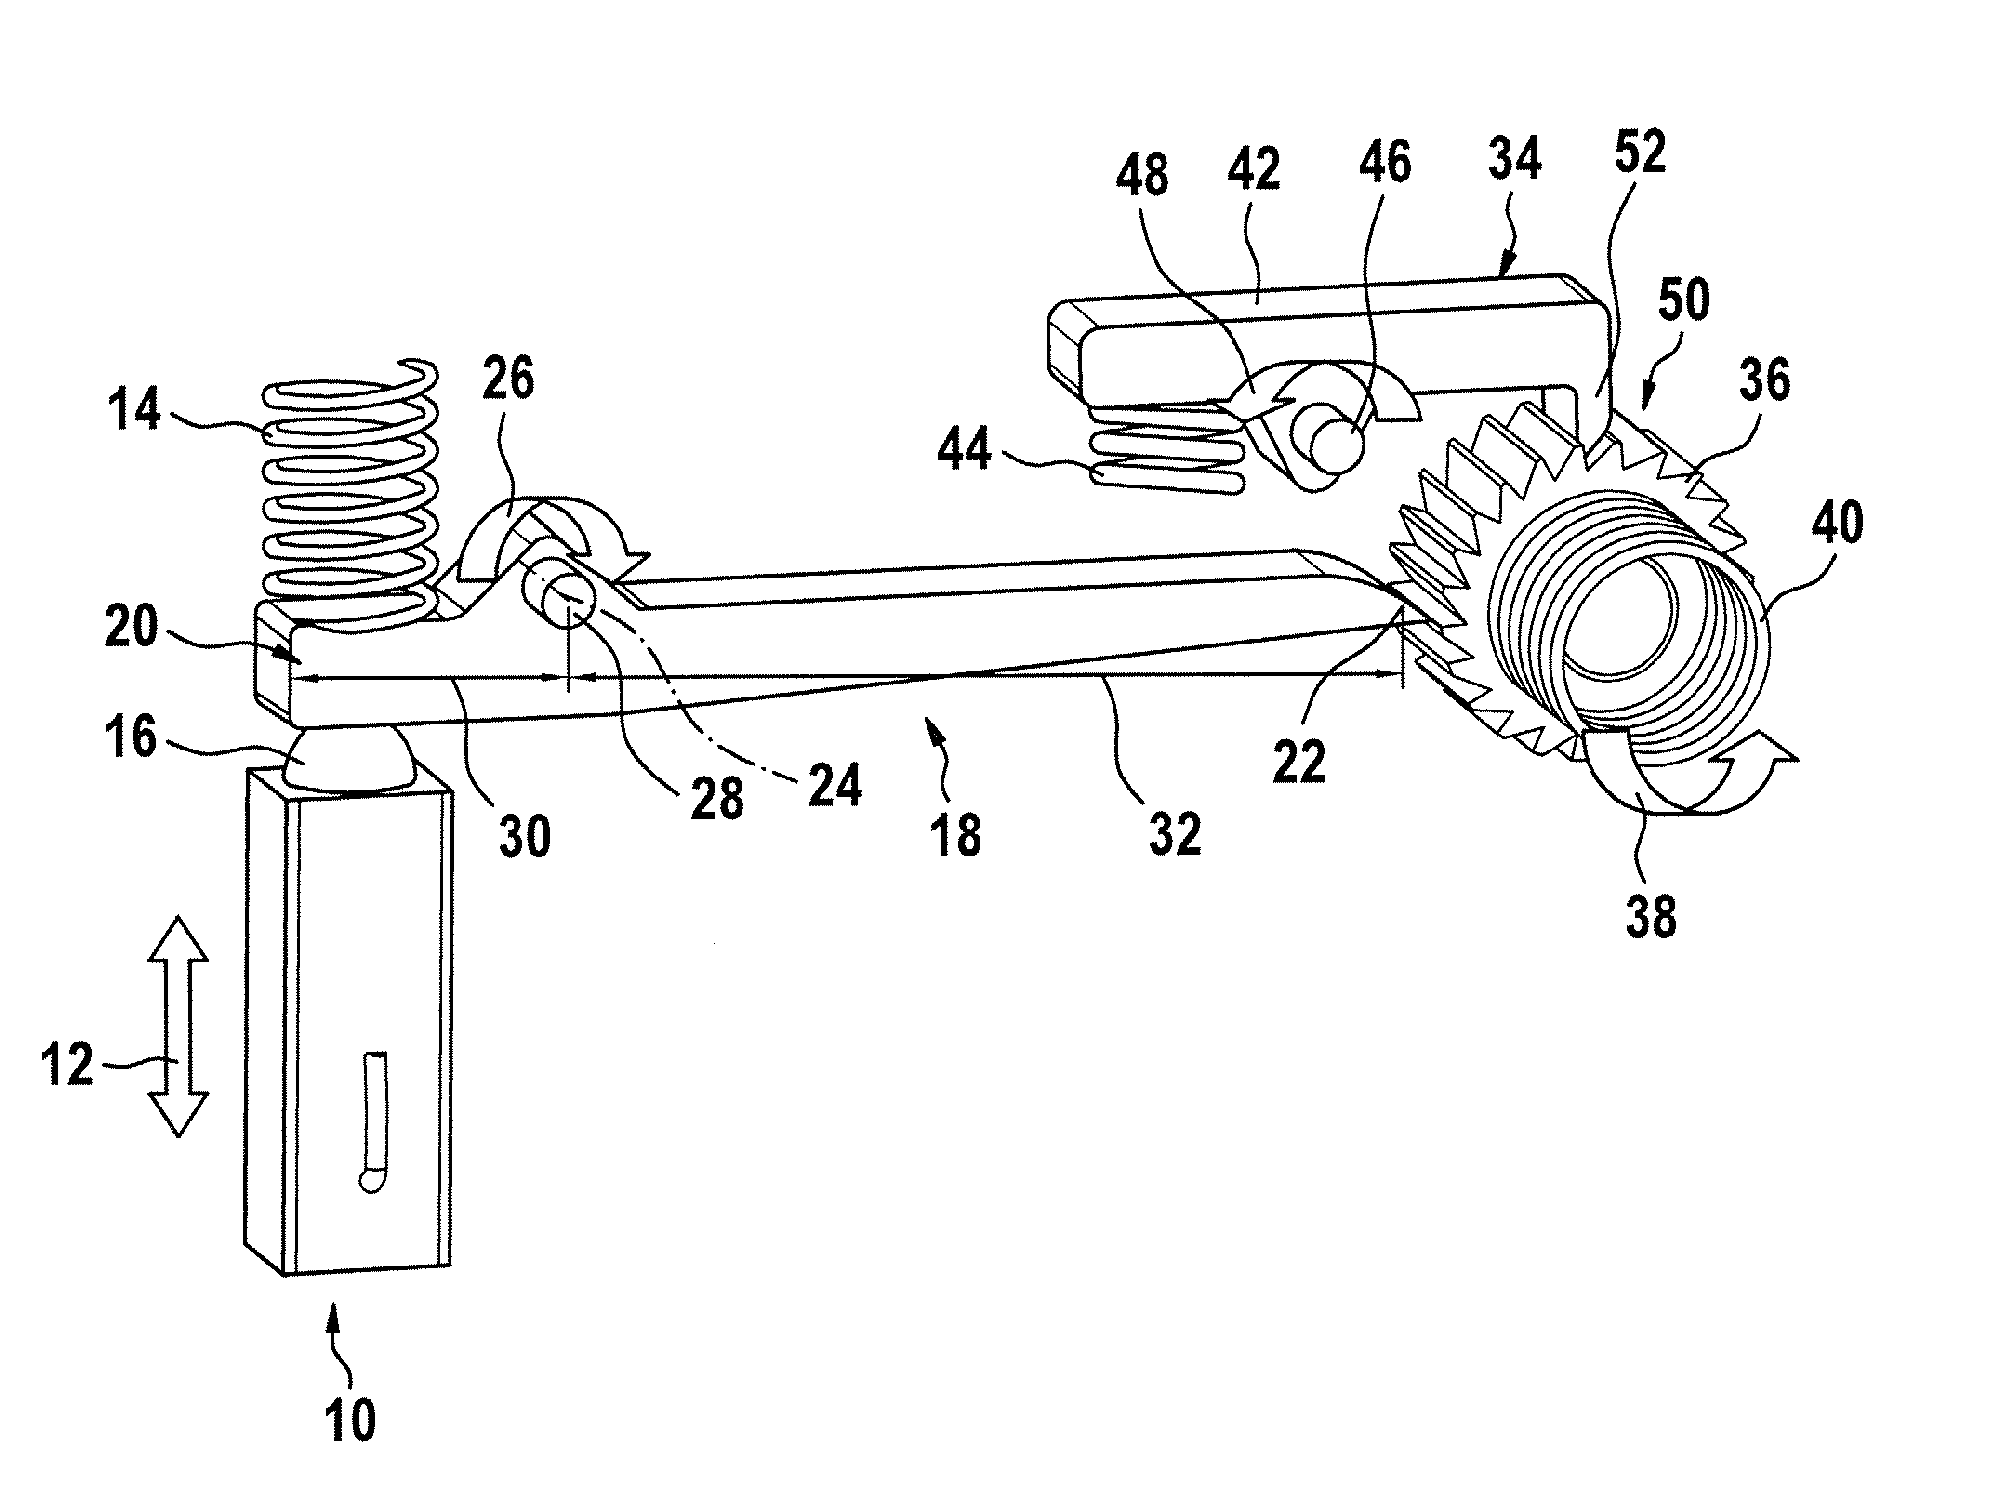 Drive unit for medical devices